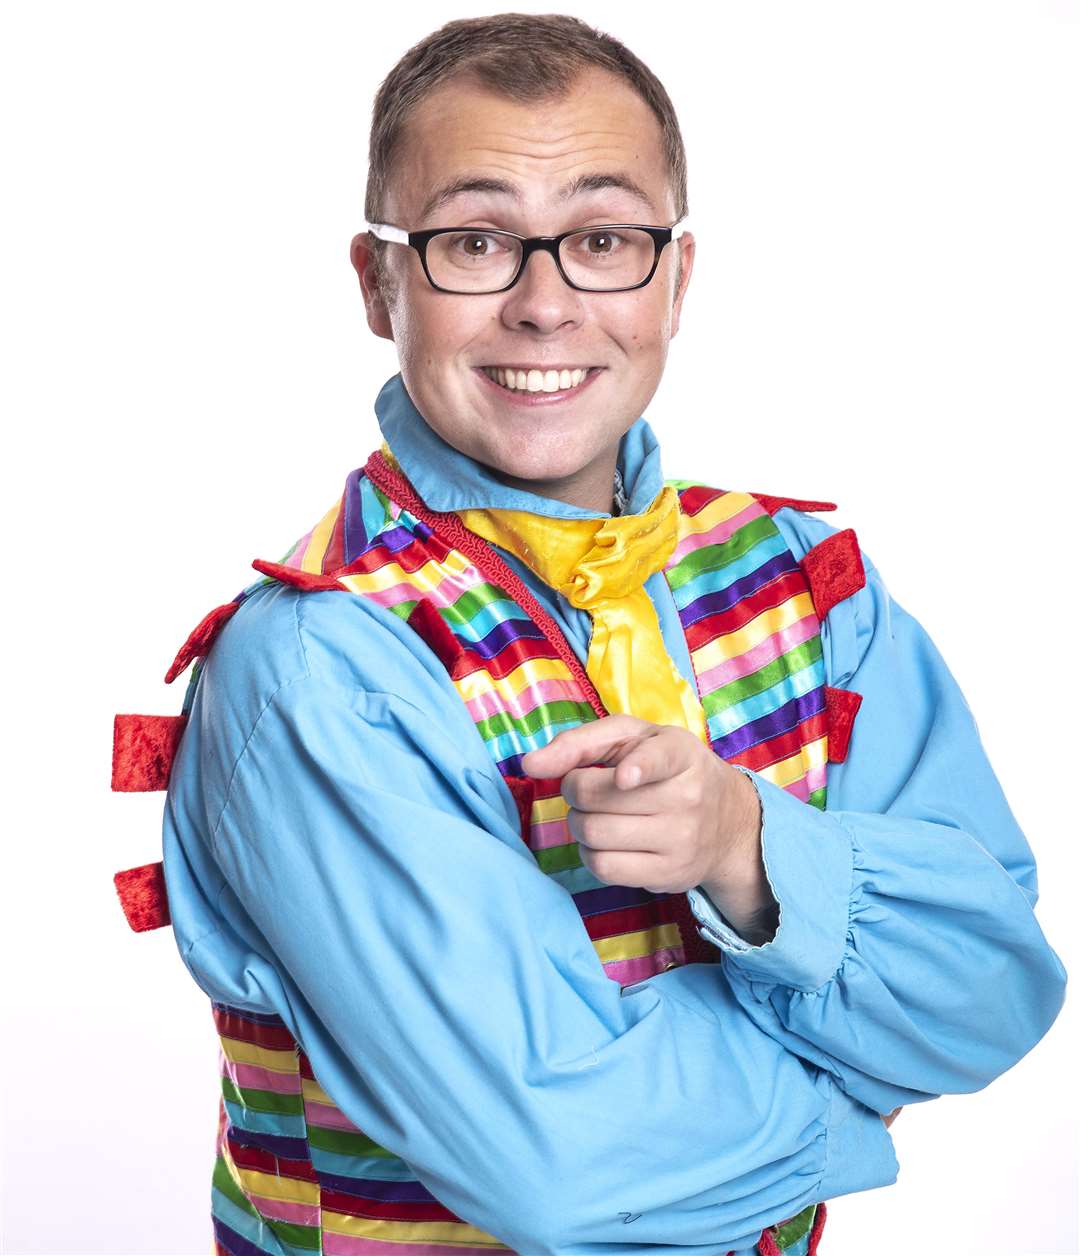 Joe Tracini will star in the Central Theatre's pantomime